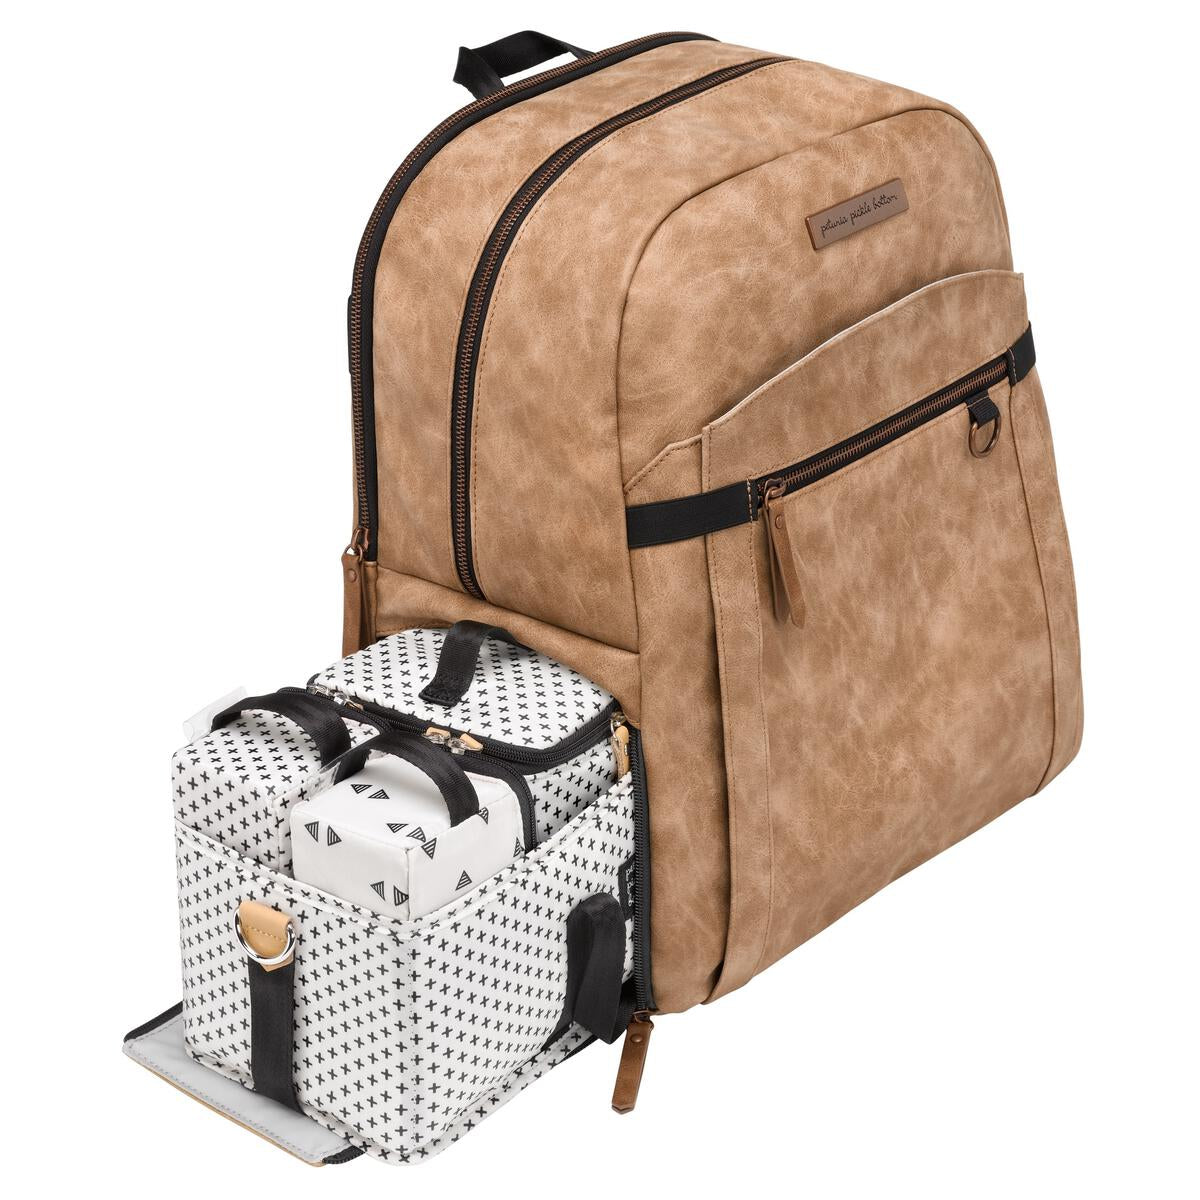 2-IN-1 PROVISIONS BACKPACK - BRIOCHE